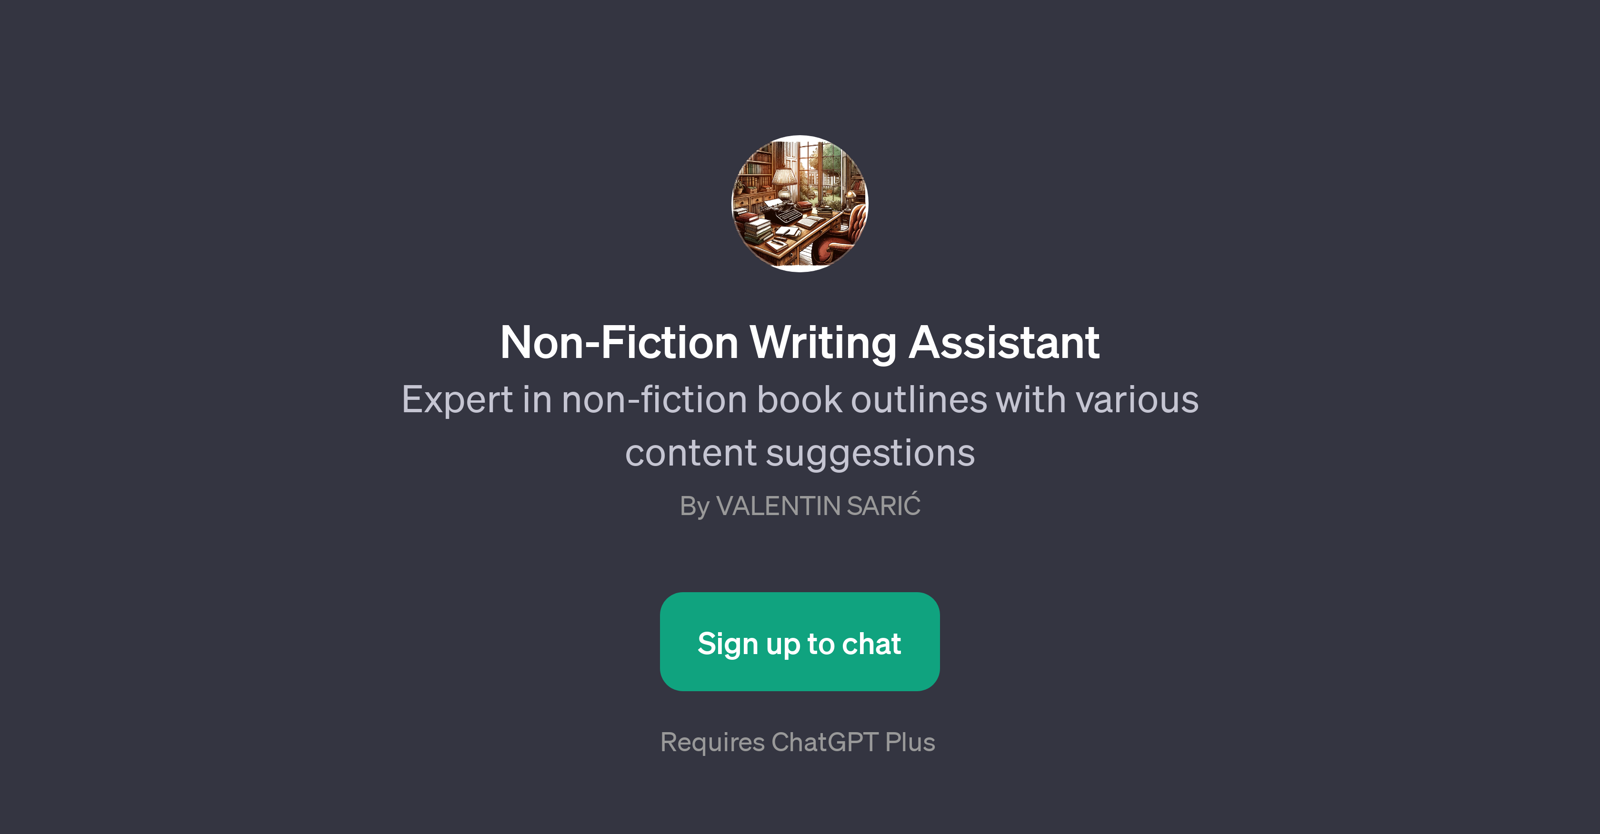 Non-Fiction Writing Assistant website